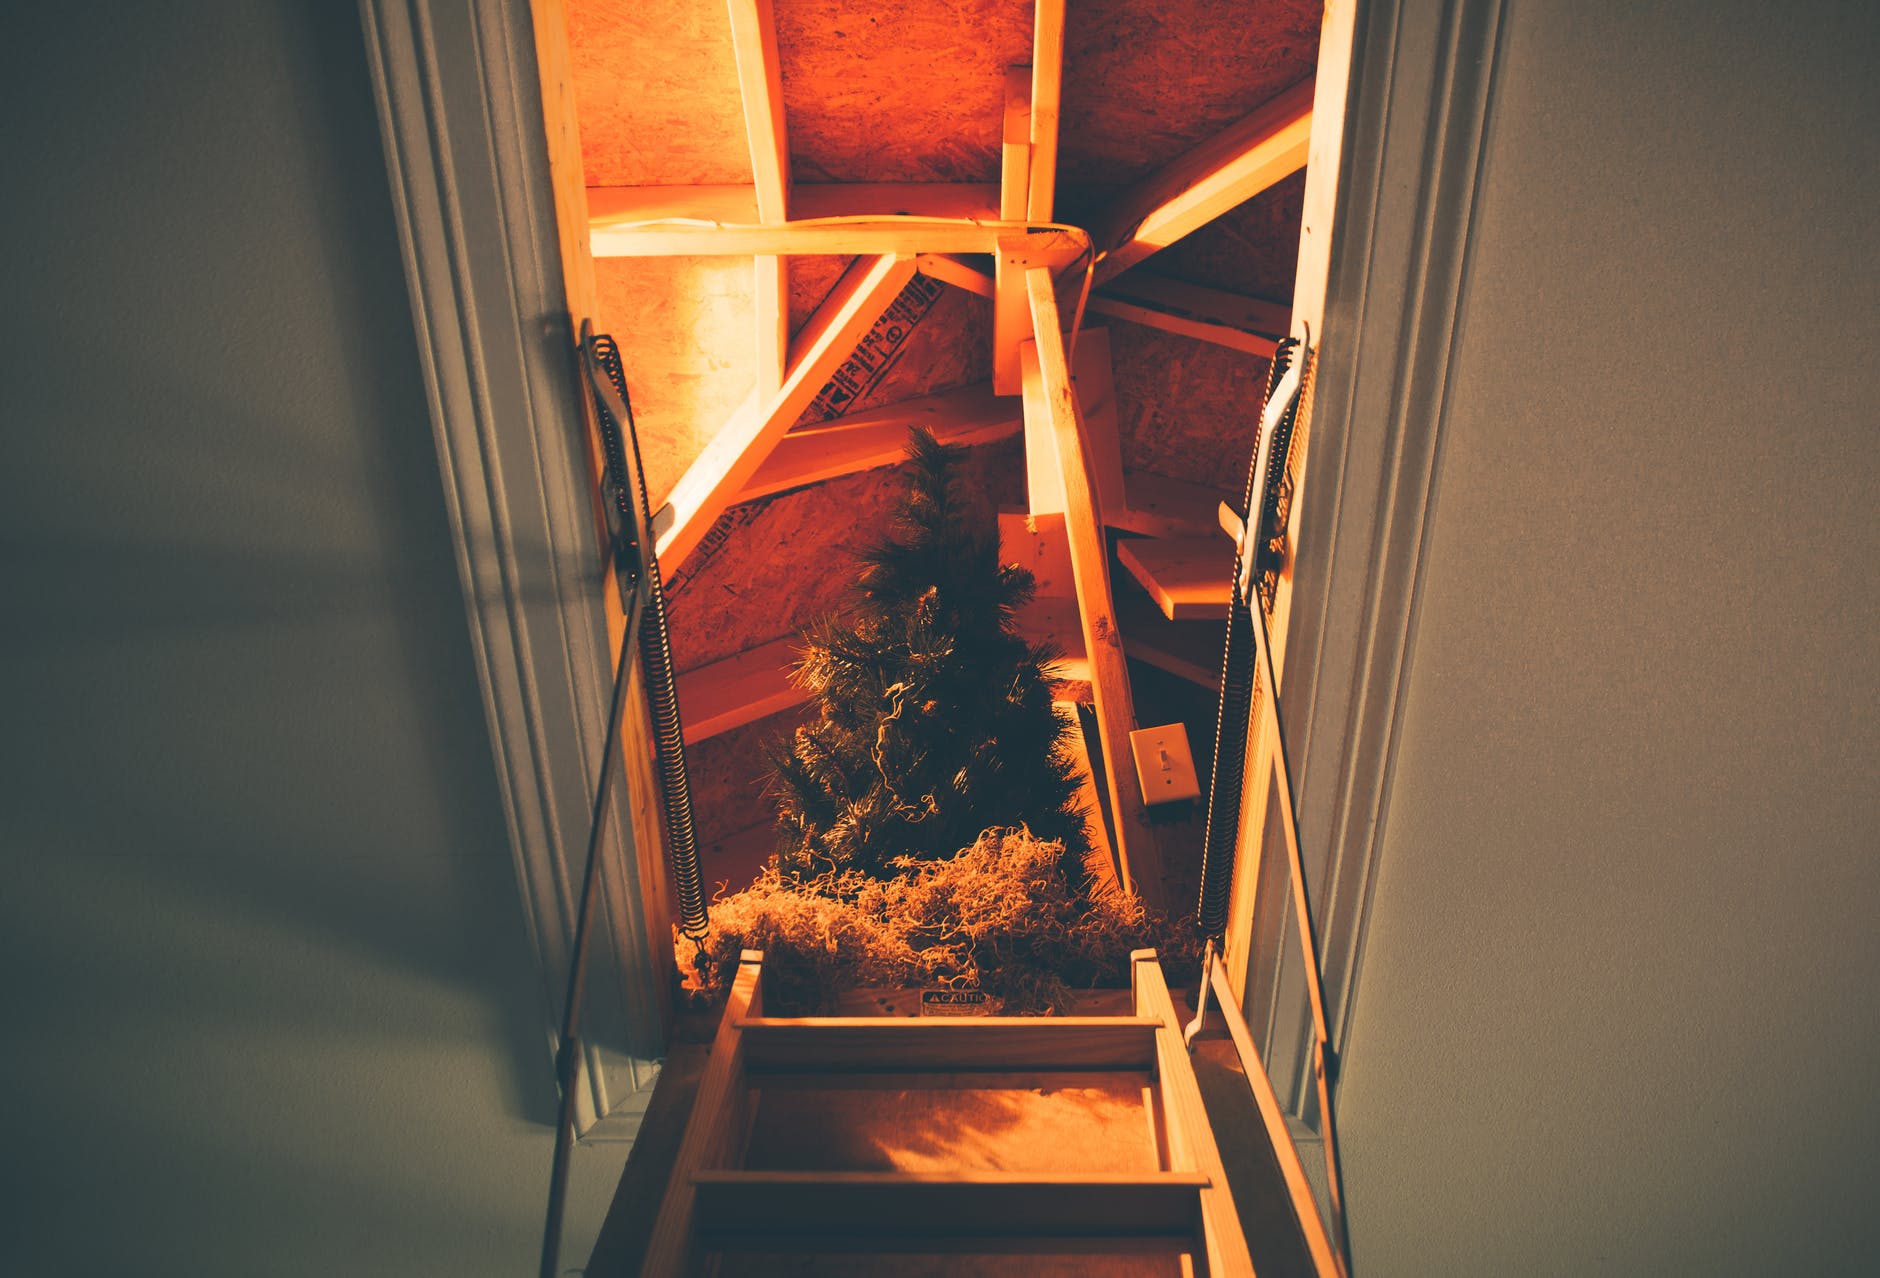 He went to the attic to search for ornaments. | Source: Pexels